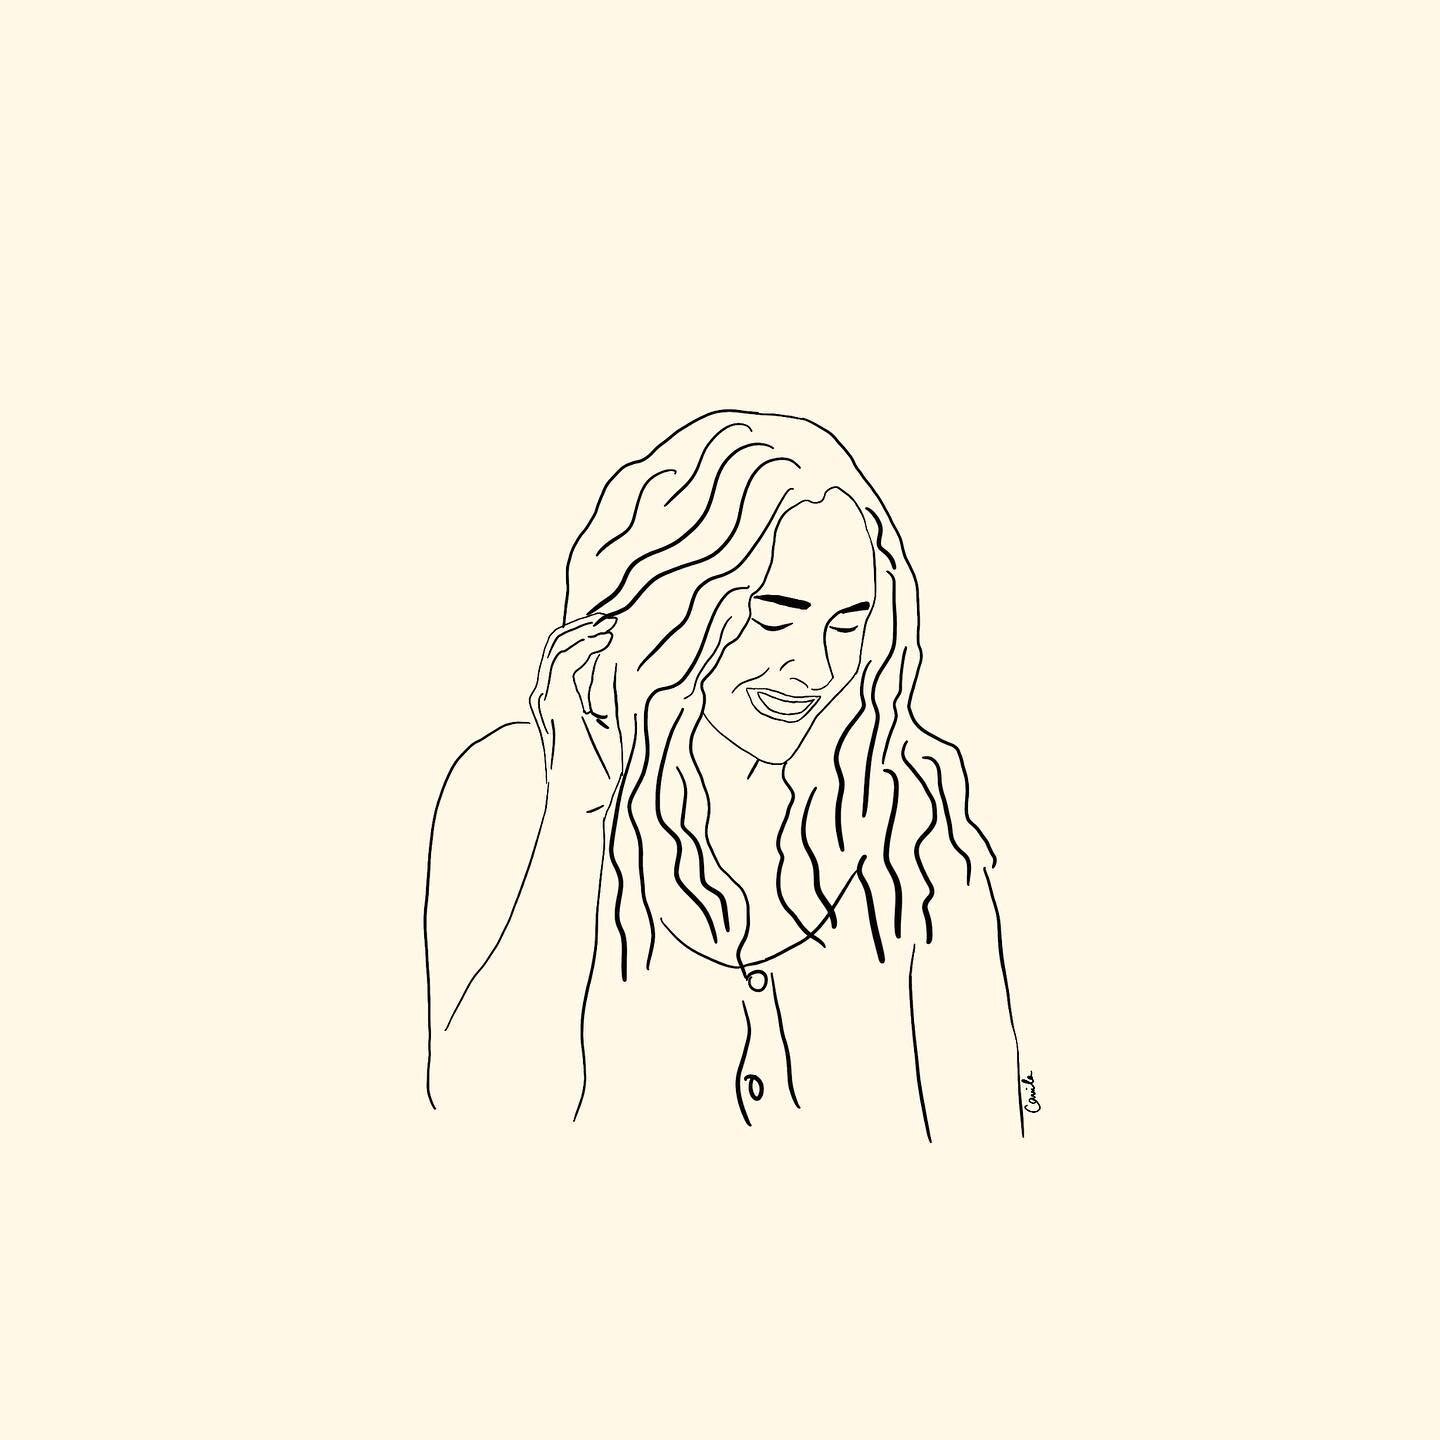 My extremely talented friend @camilasbeing drew me, and it made my entire day. 💛 

PS- If you need a gift for someone, her drawings are so special. Check out her page / DM her for details.

PPS- I love you, Cam! Thank you for sending me this smile.